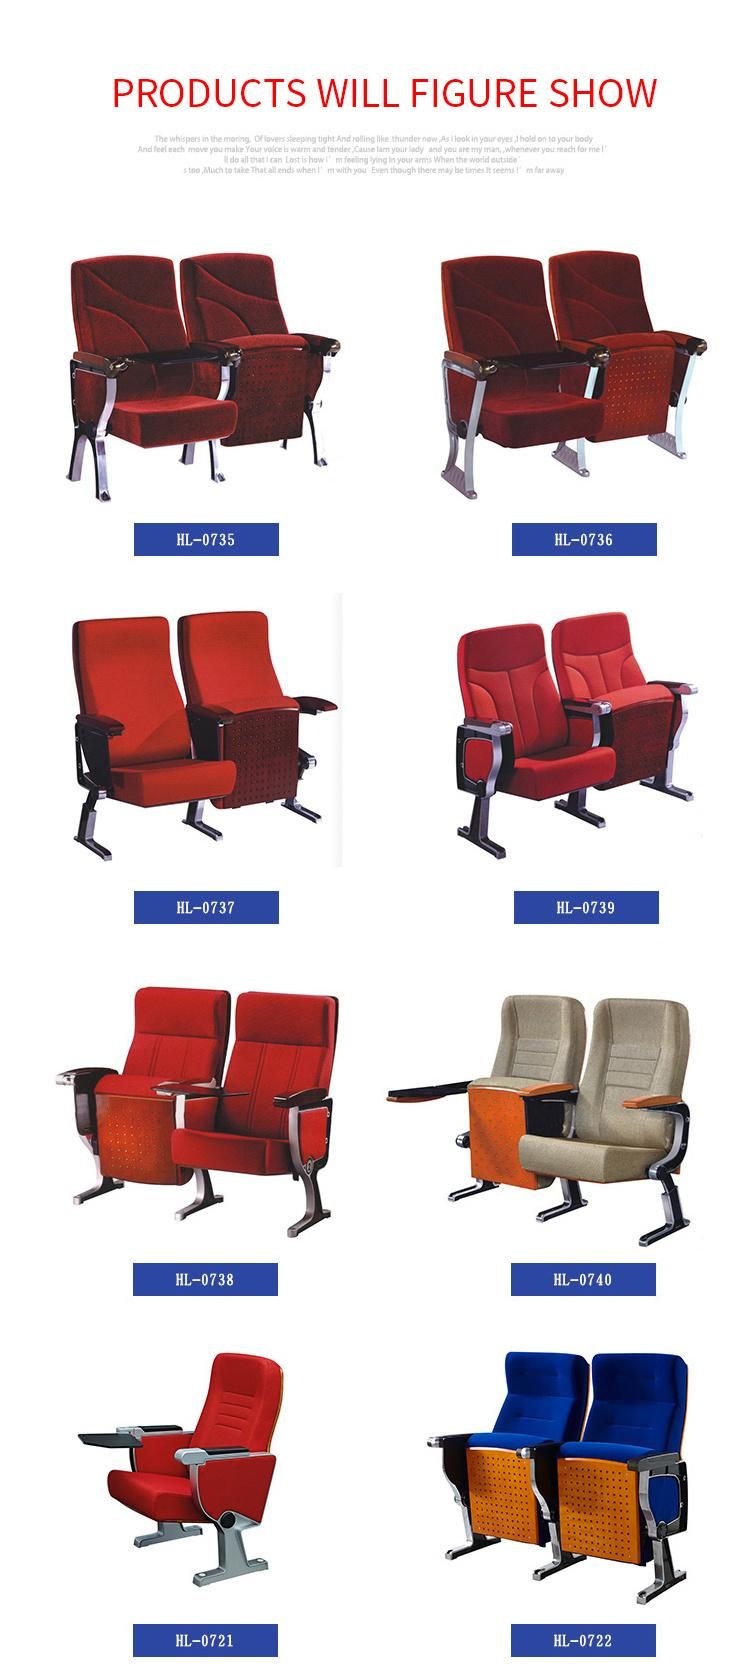 Luxury Home Triple Theater Cinema VIP Seat Padded Chair College Ladder Room School Auditorium Chairs